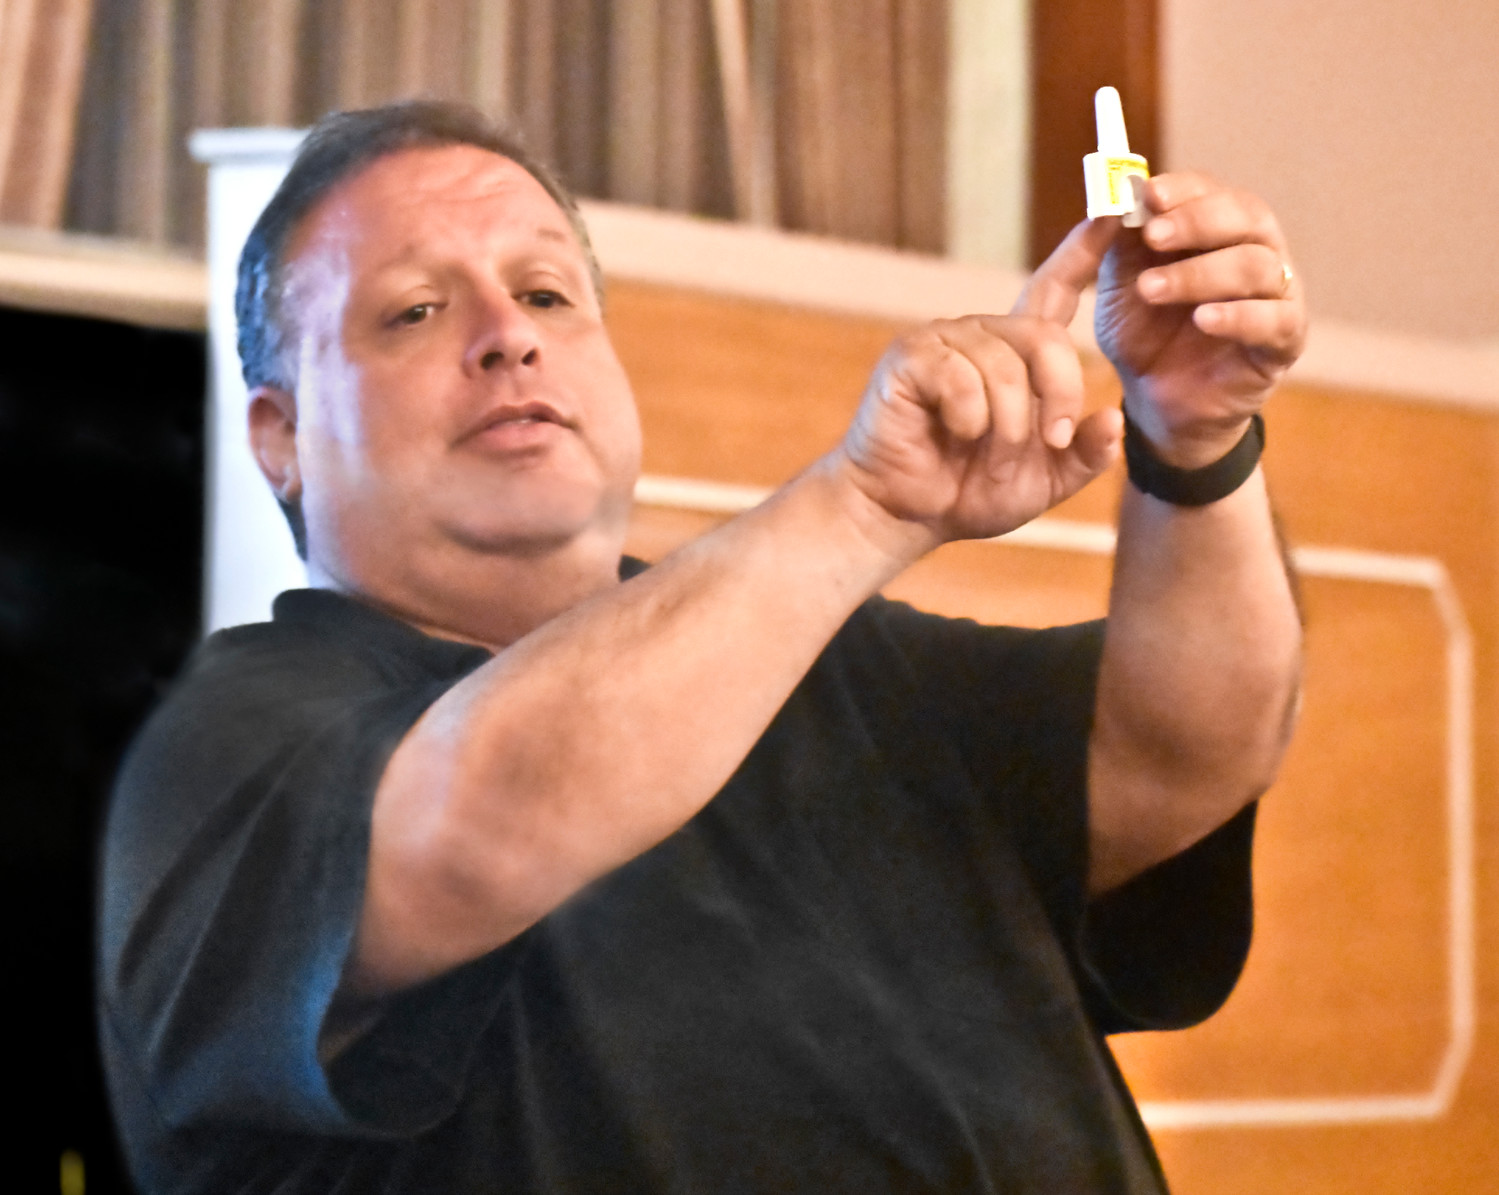 David Hymowitz, of the Nassau County Department of Human Services, led a training session at Central Synagogue-Beth Emeth on Aug. 23, teaching residents how to reverse an opioid overdose by administering Narcan.